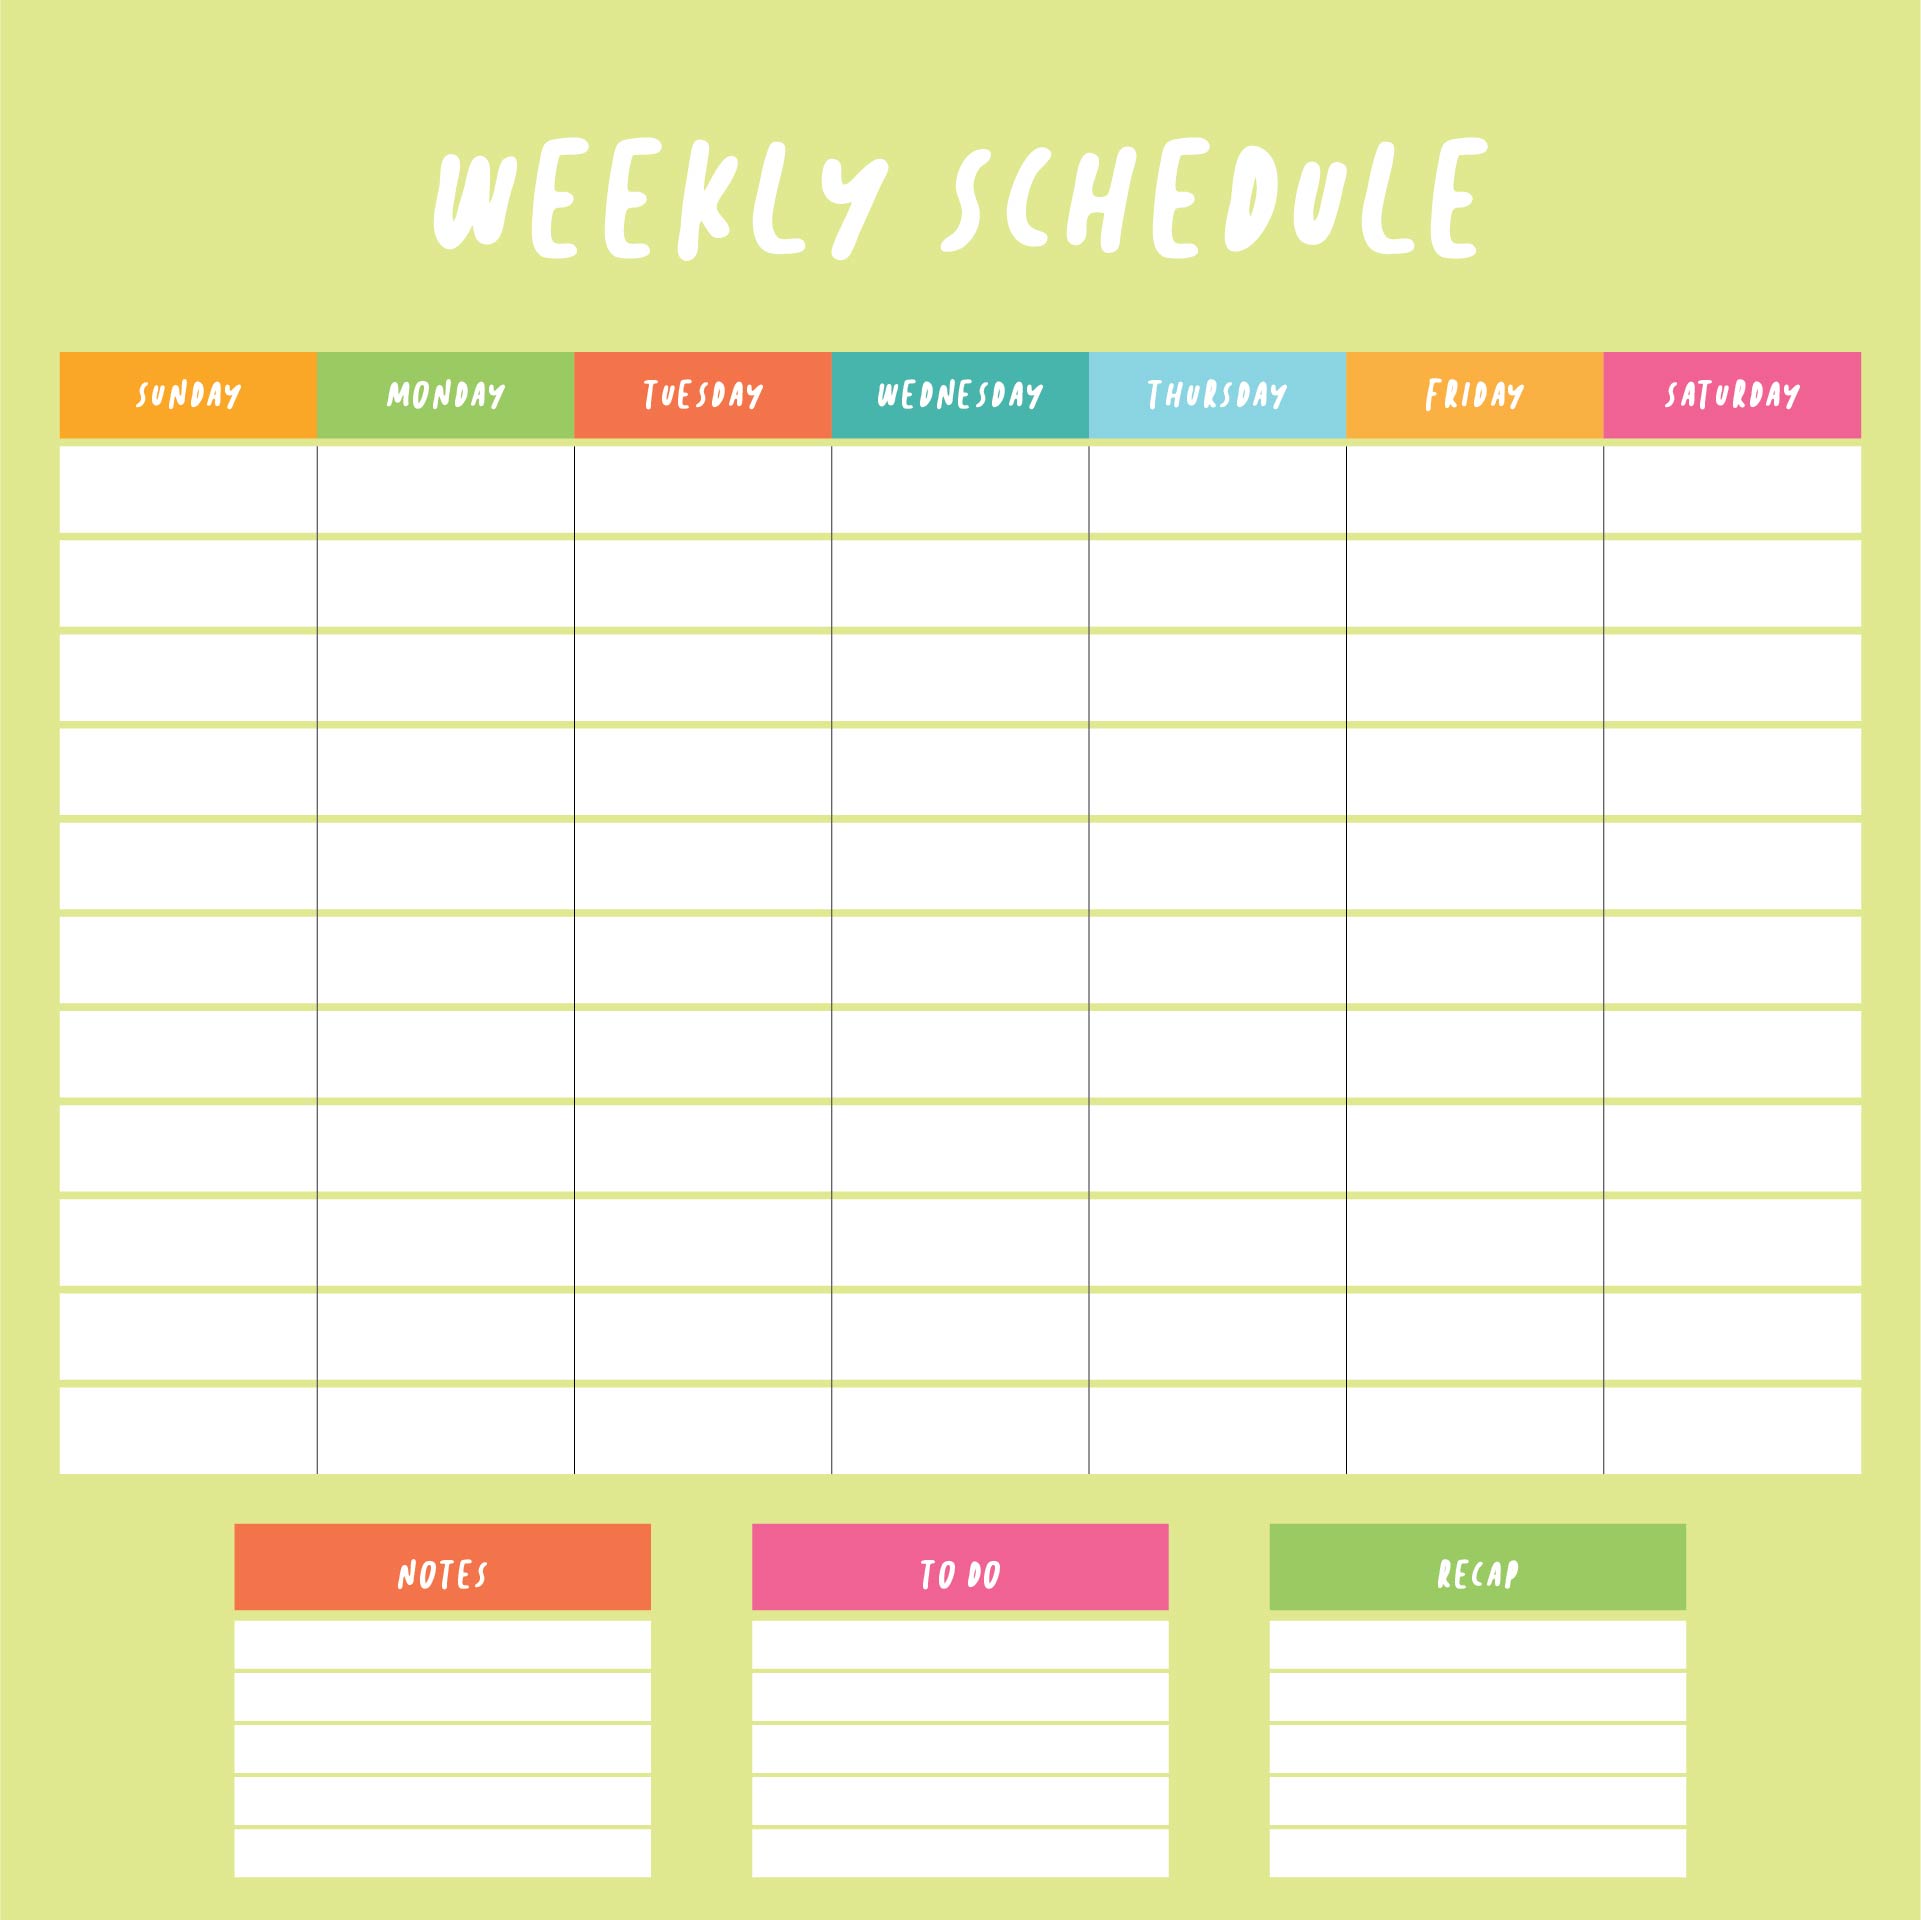 free-printable-weekly-work-schedule-template-for-employee-scheduling